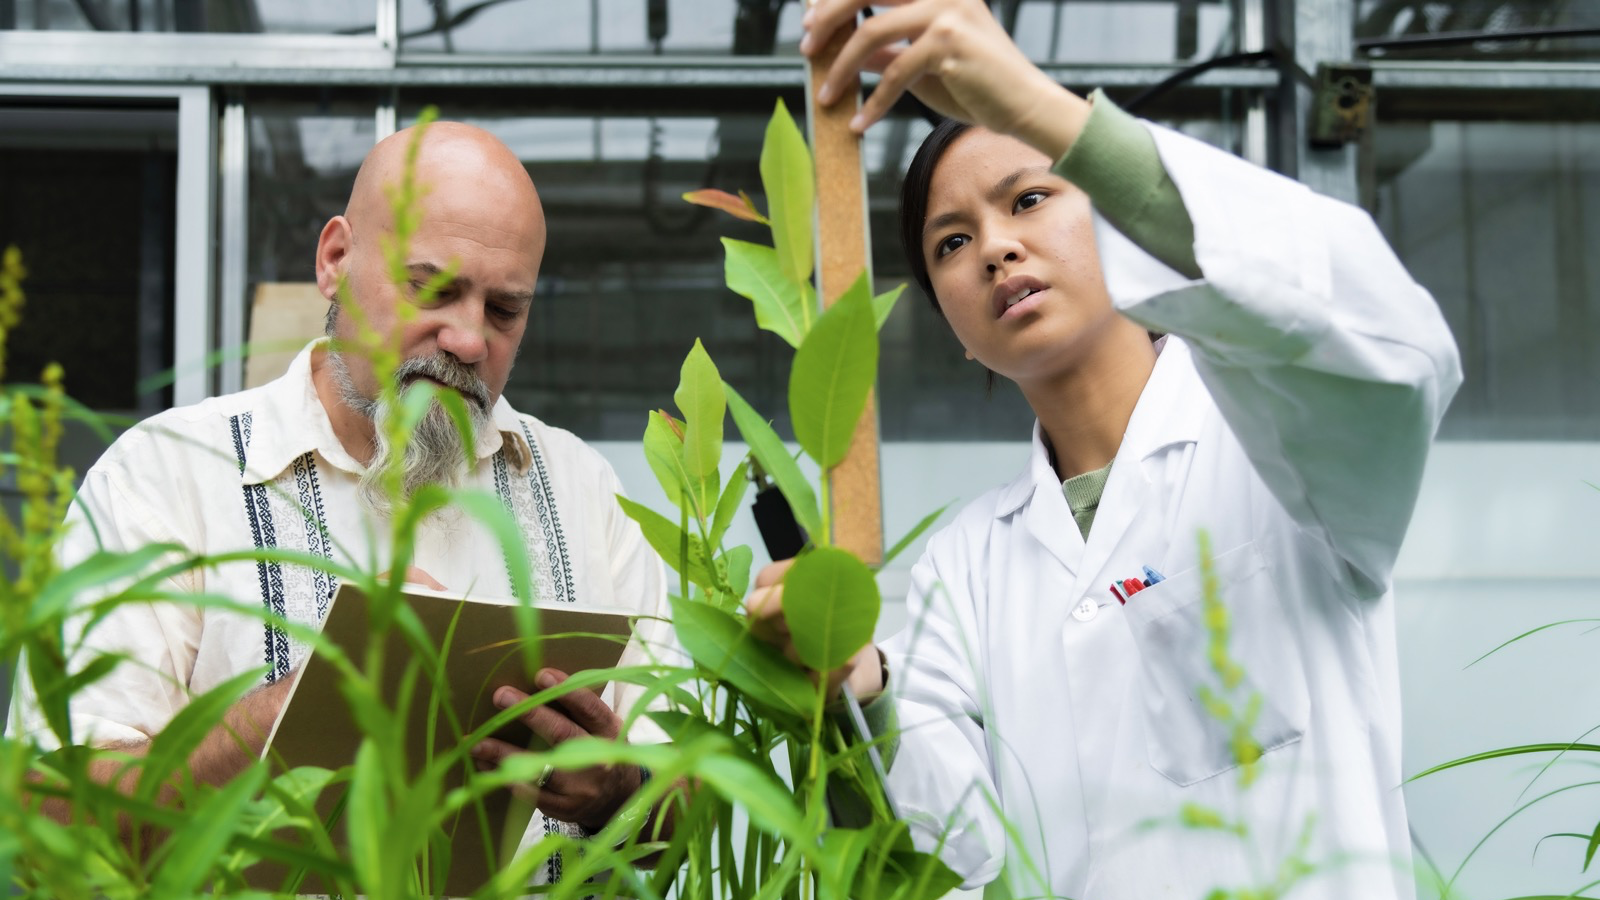 Two researchers in a lab measuring plant growth. One has a ruler and is measuring the plant, the other has a clipboard.